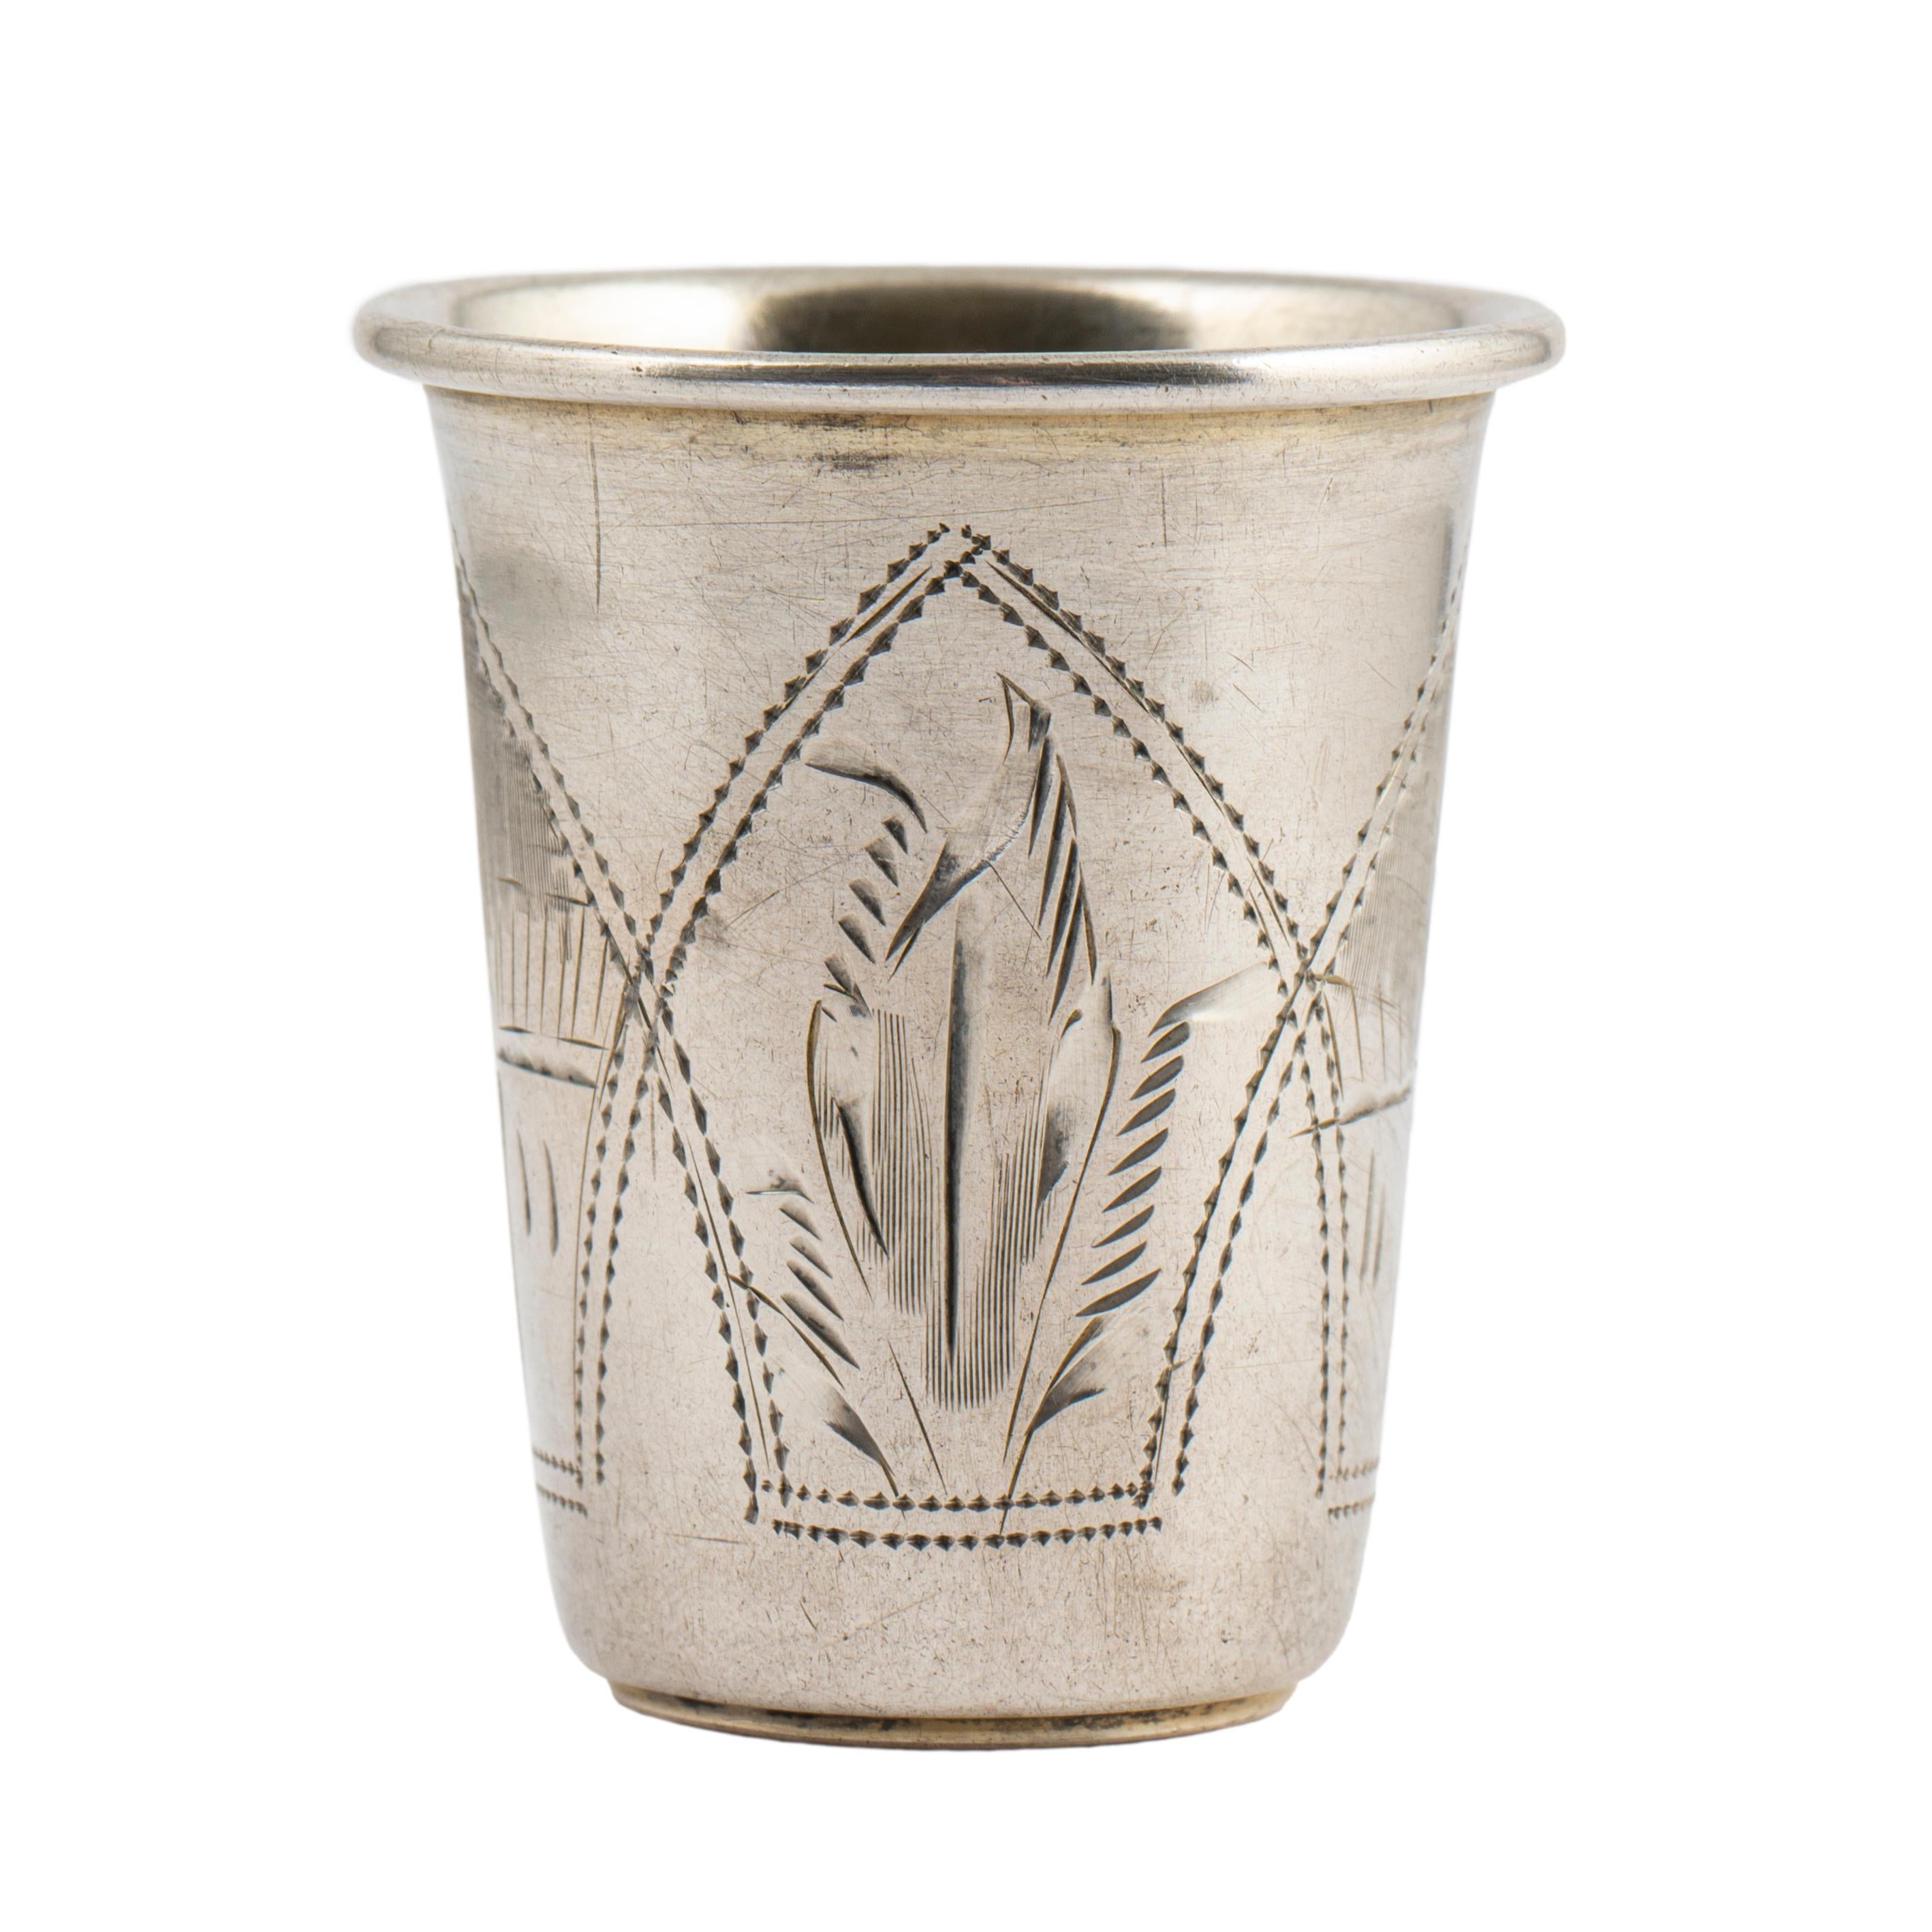 Women's or Men's Five Ukrainian Imperial-era Silver Vodka Cups, late 19th to early 20th century